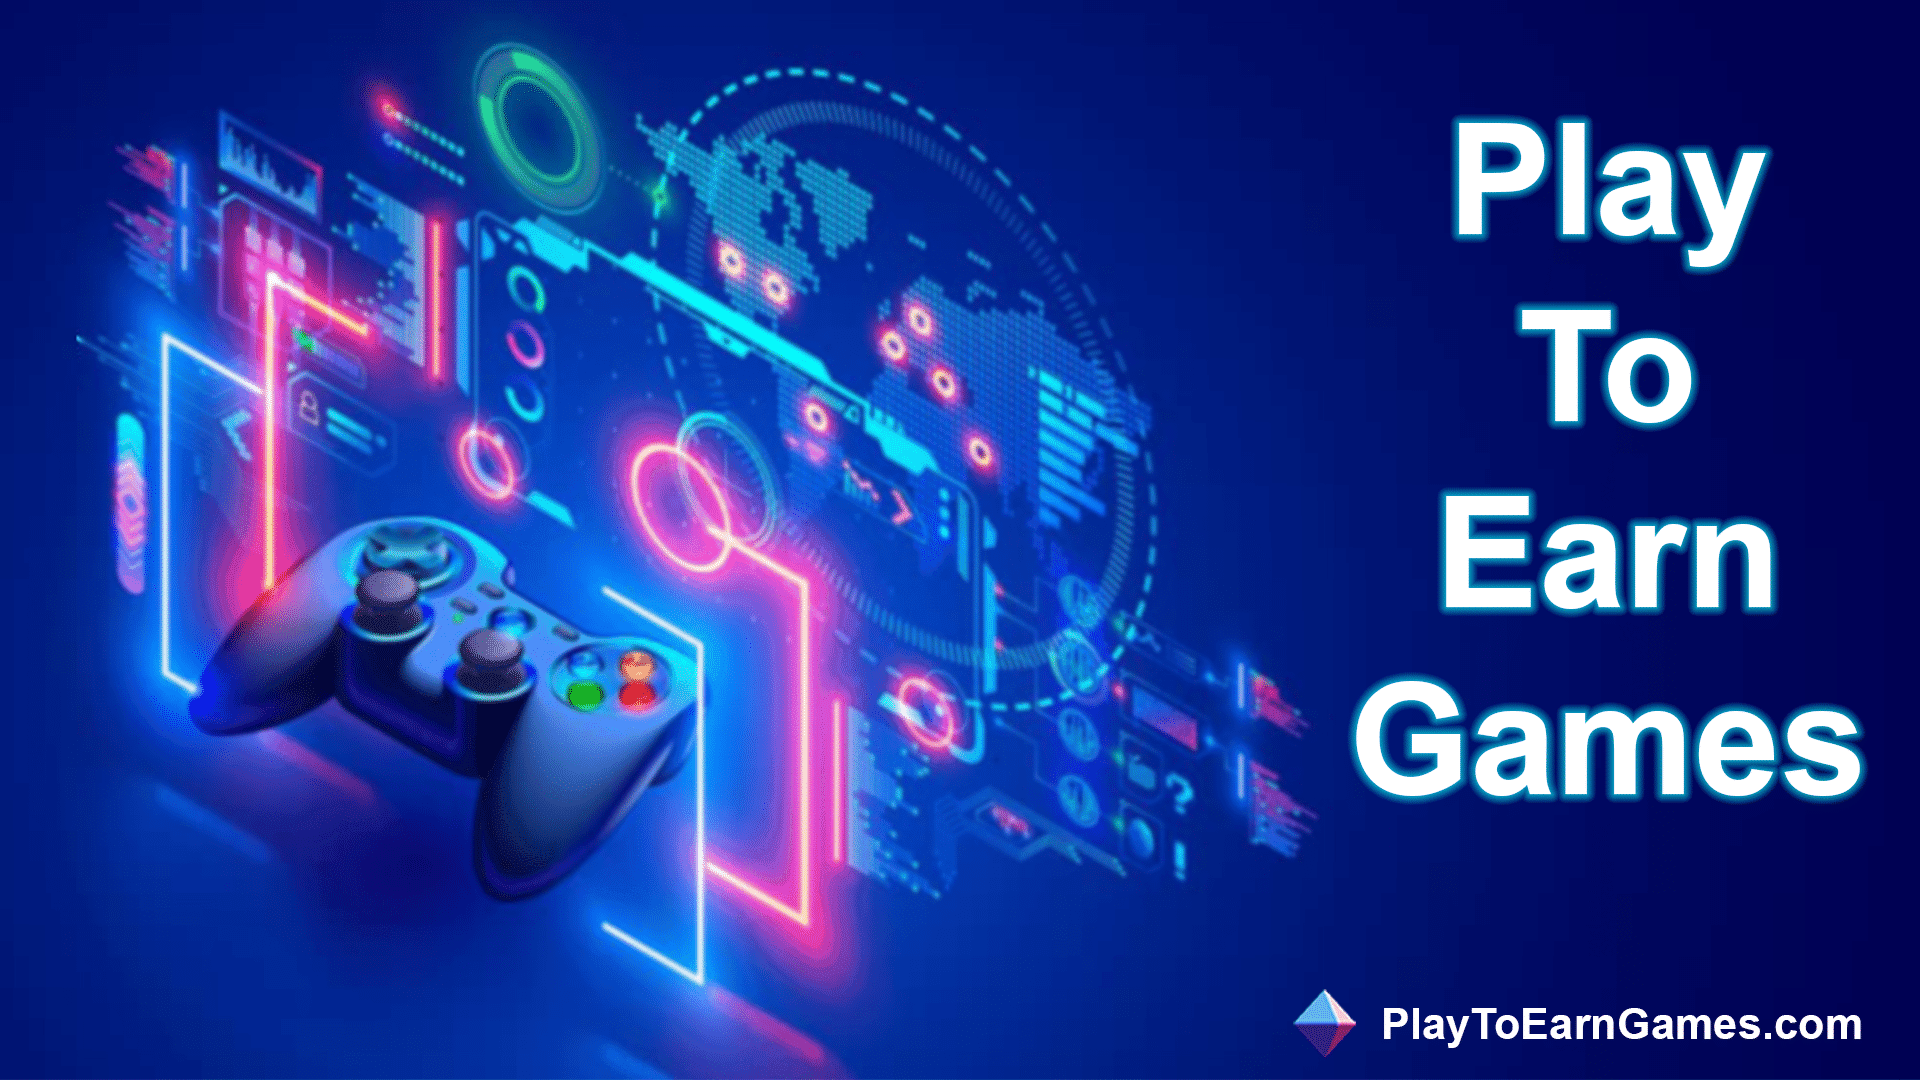 Making Money While Gaming: A Guide to Play-to-Earn Games